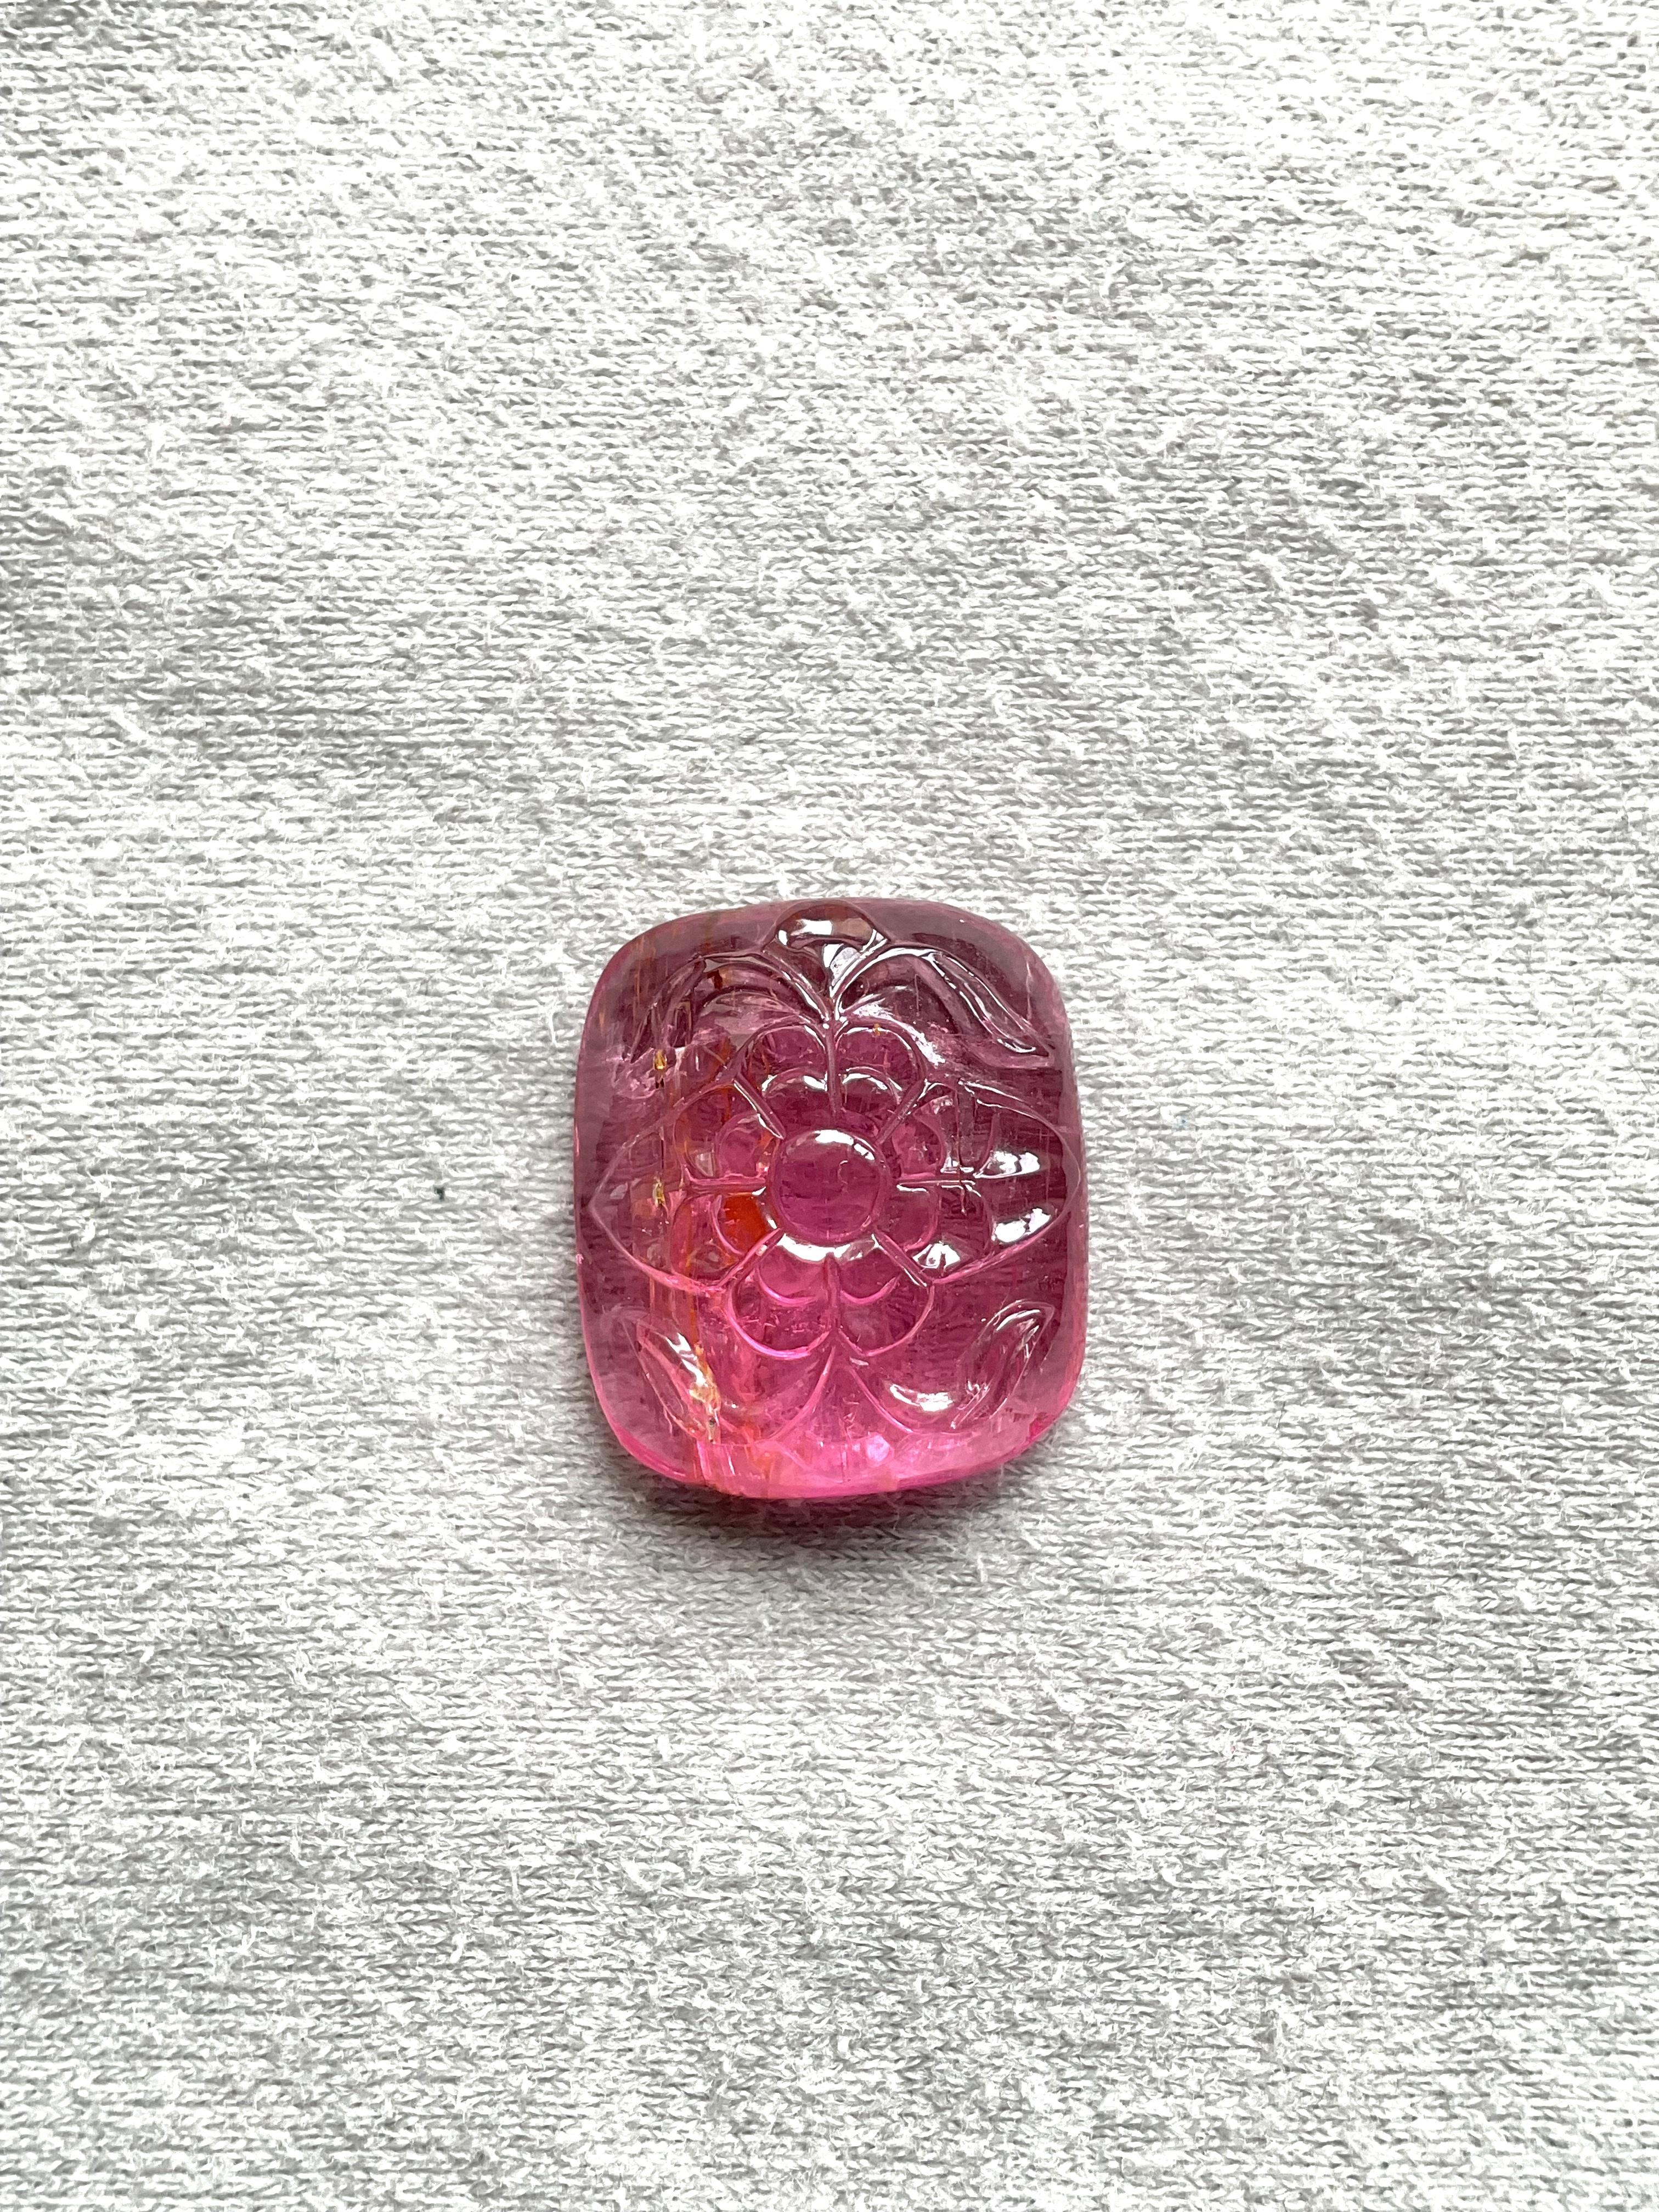 26.76 Carats Top Quality Rubellite Tourmaline Carved Fine Jewelry Natural Gem In New Condition In Jaipur, RJ